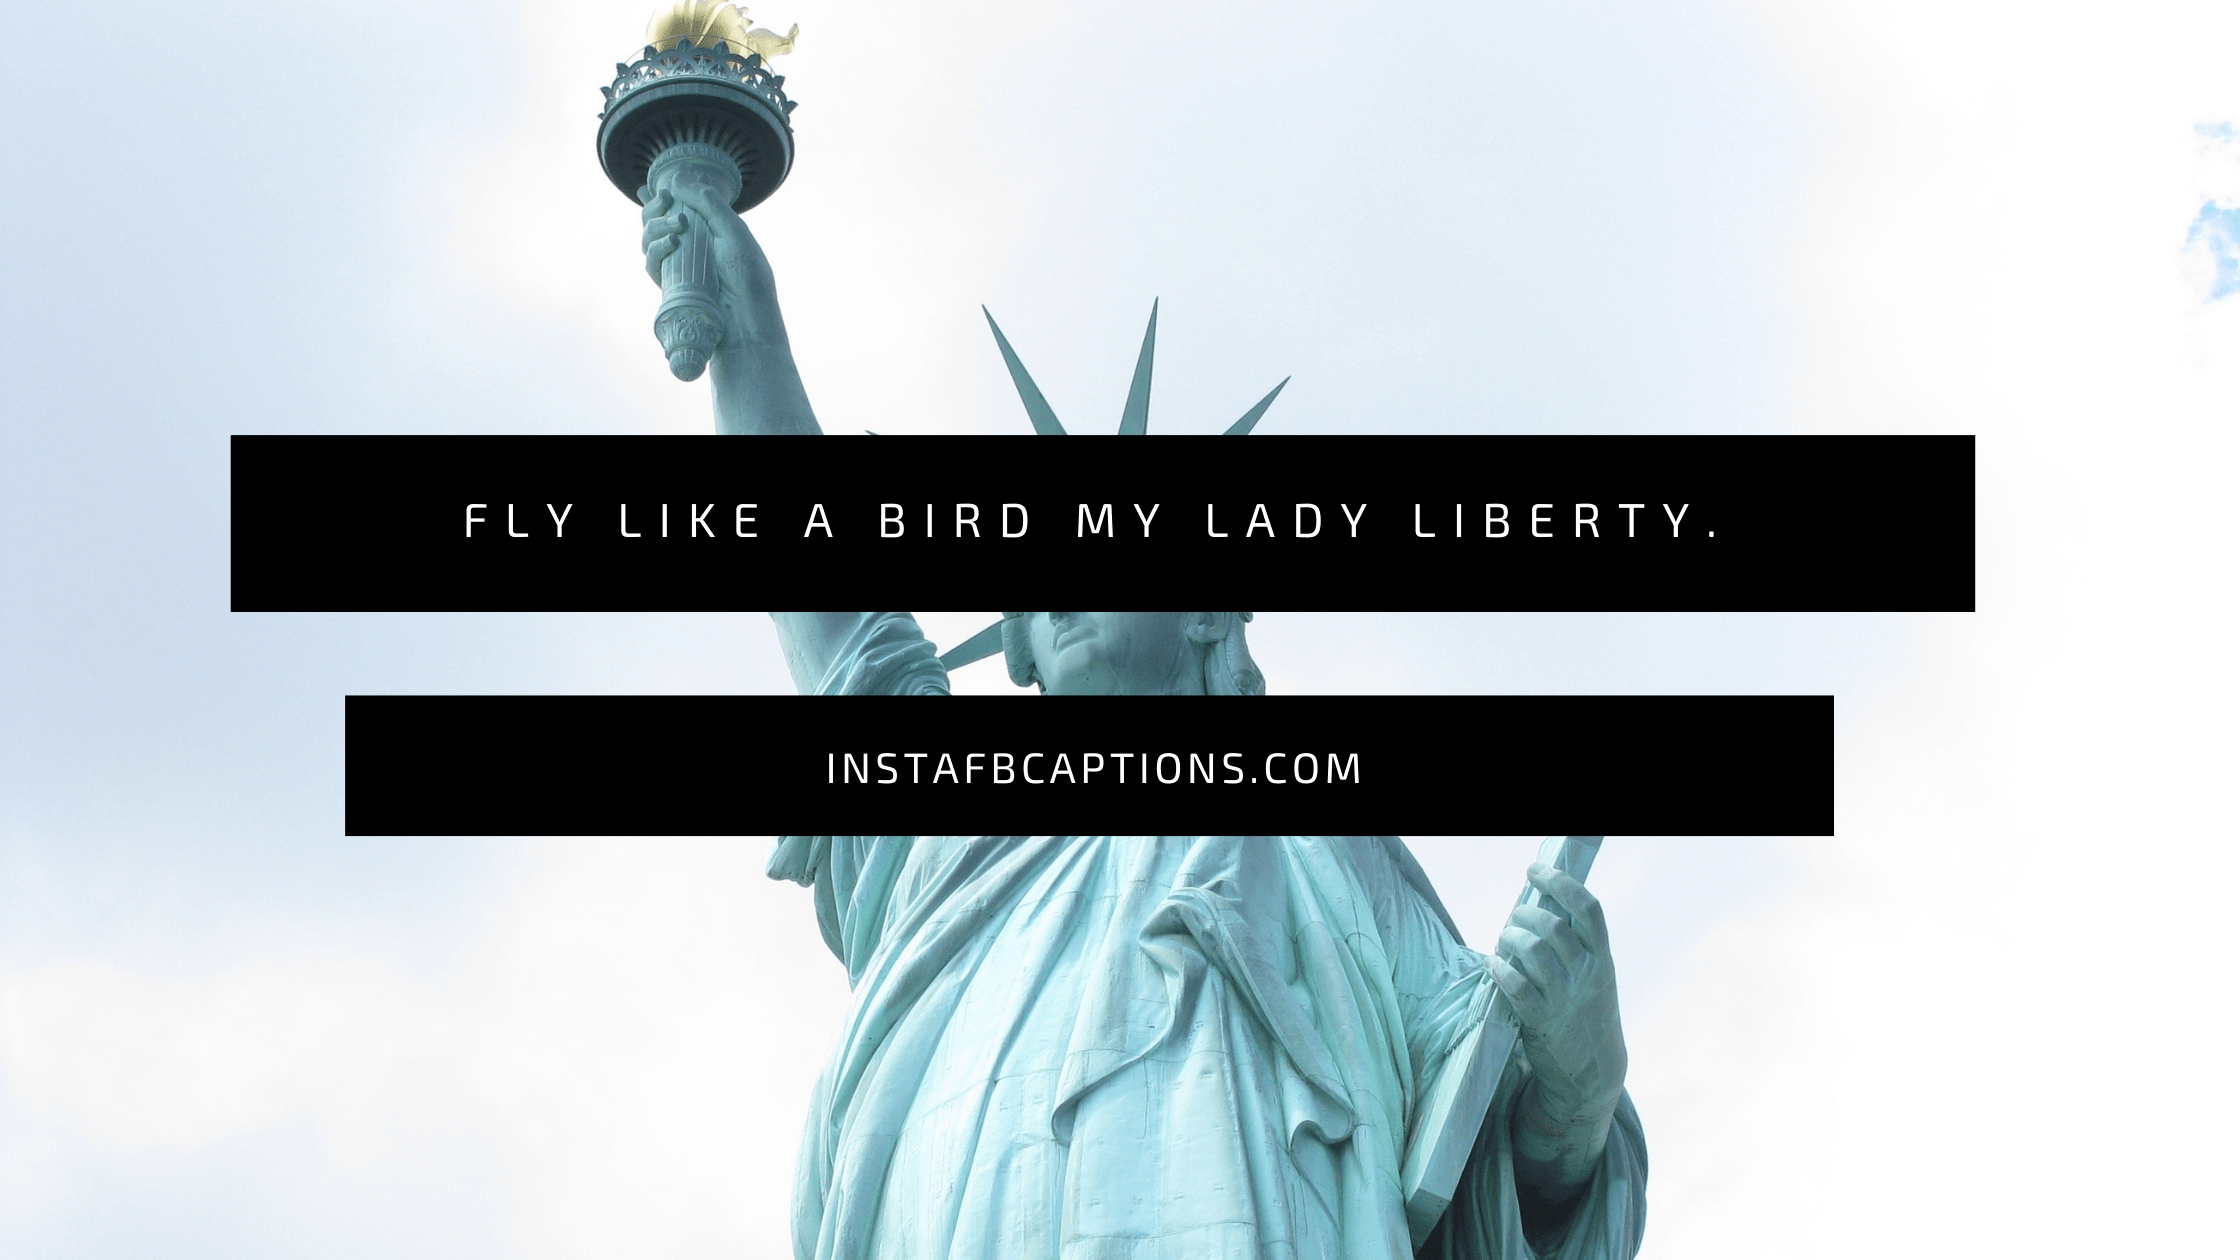 Funny Statue Of Liberty Captions  - Funny Statue of Liberty Captions  - 78 Statue of Liberty Instagram Captions in 2023